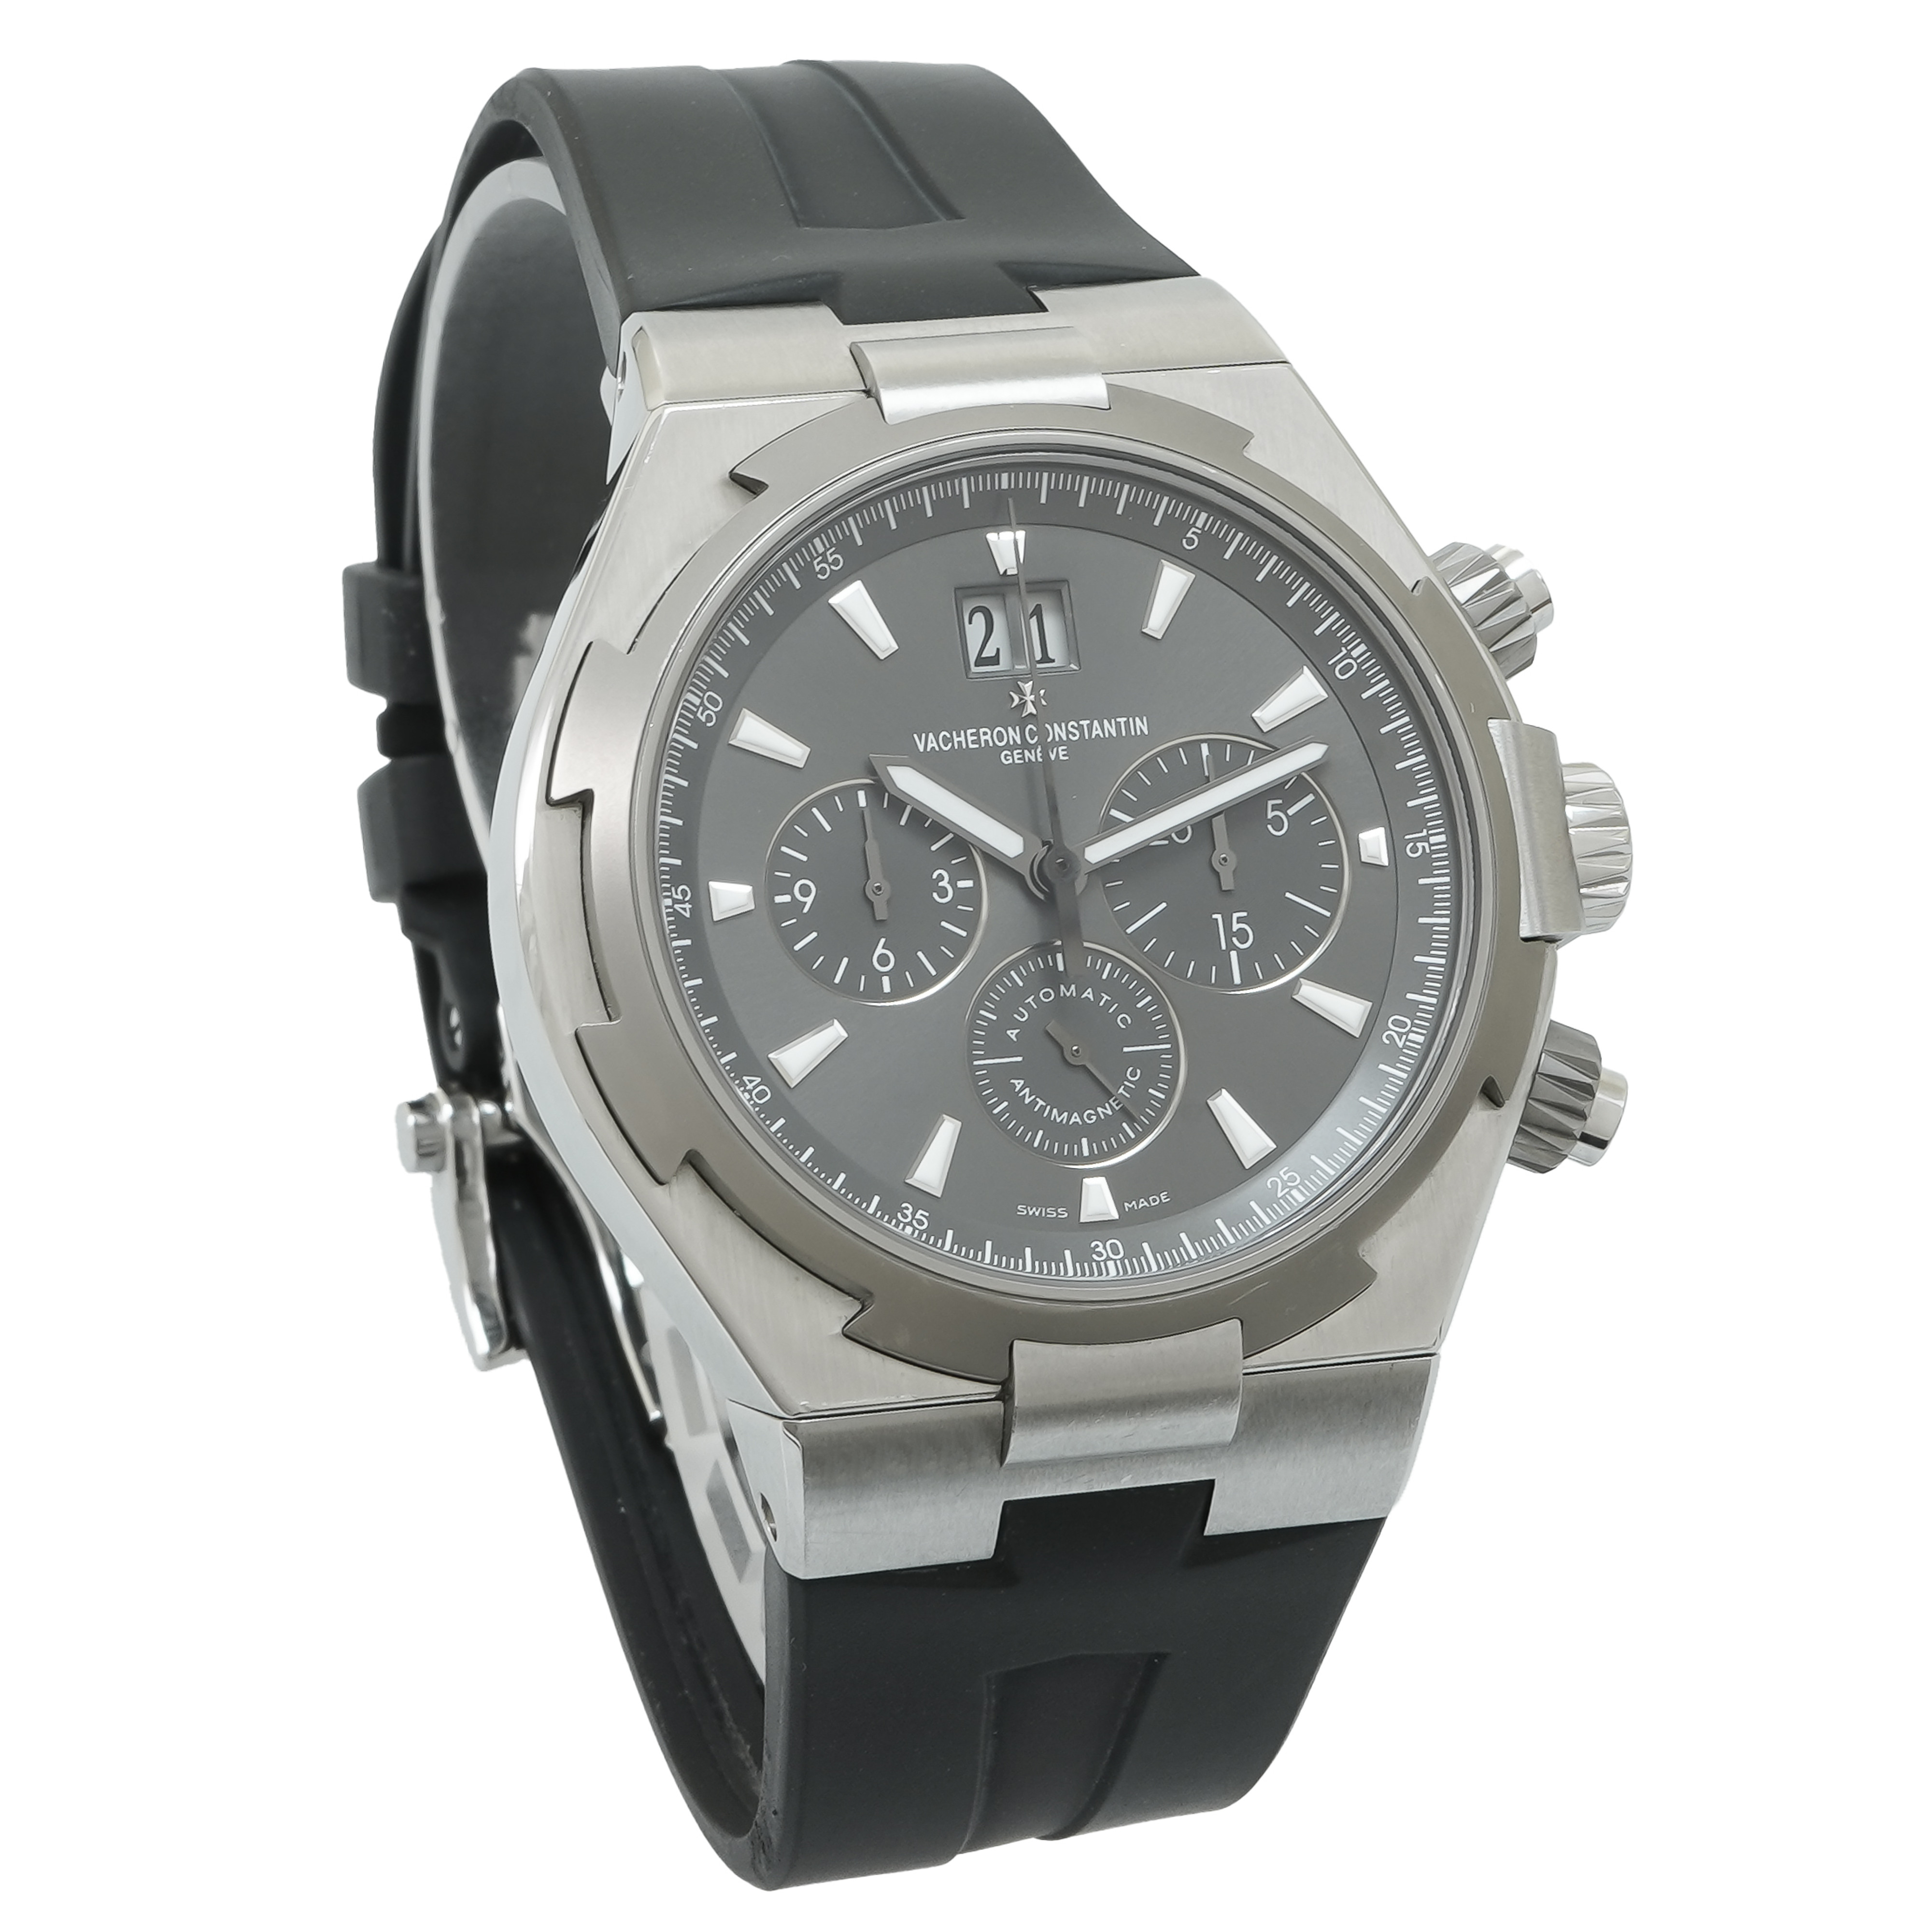 Vacheron Constantin Overseas | Chronograph | Ref. 49150 | Box & Papers | 2011 | Black Dial | Stainless Steel